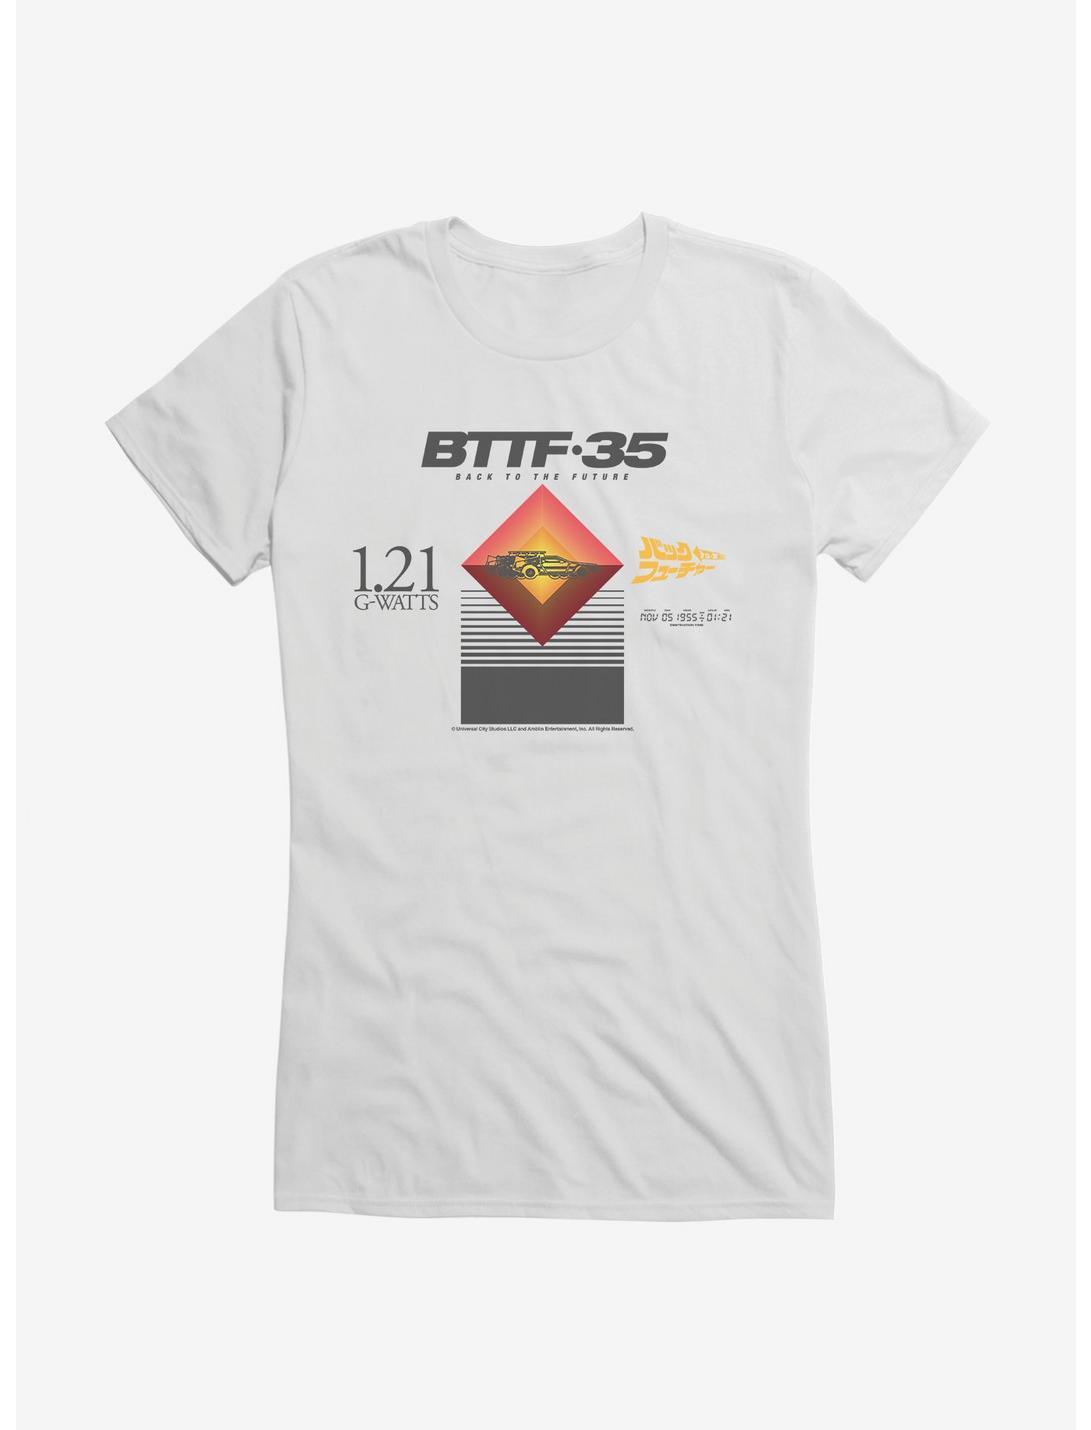 Back To The Future BTTF-35 1.21 G-Watts Girls T-Shirt, , hi-res